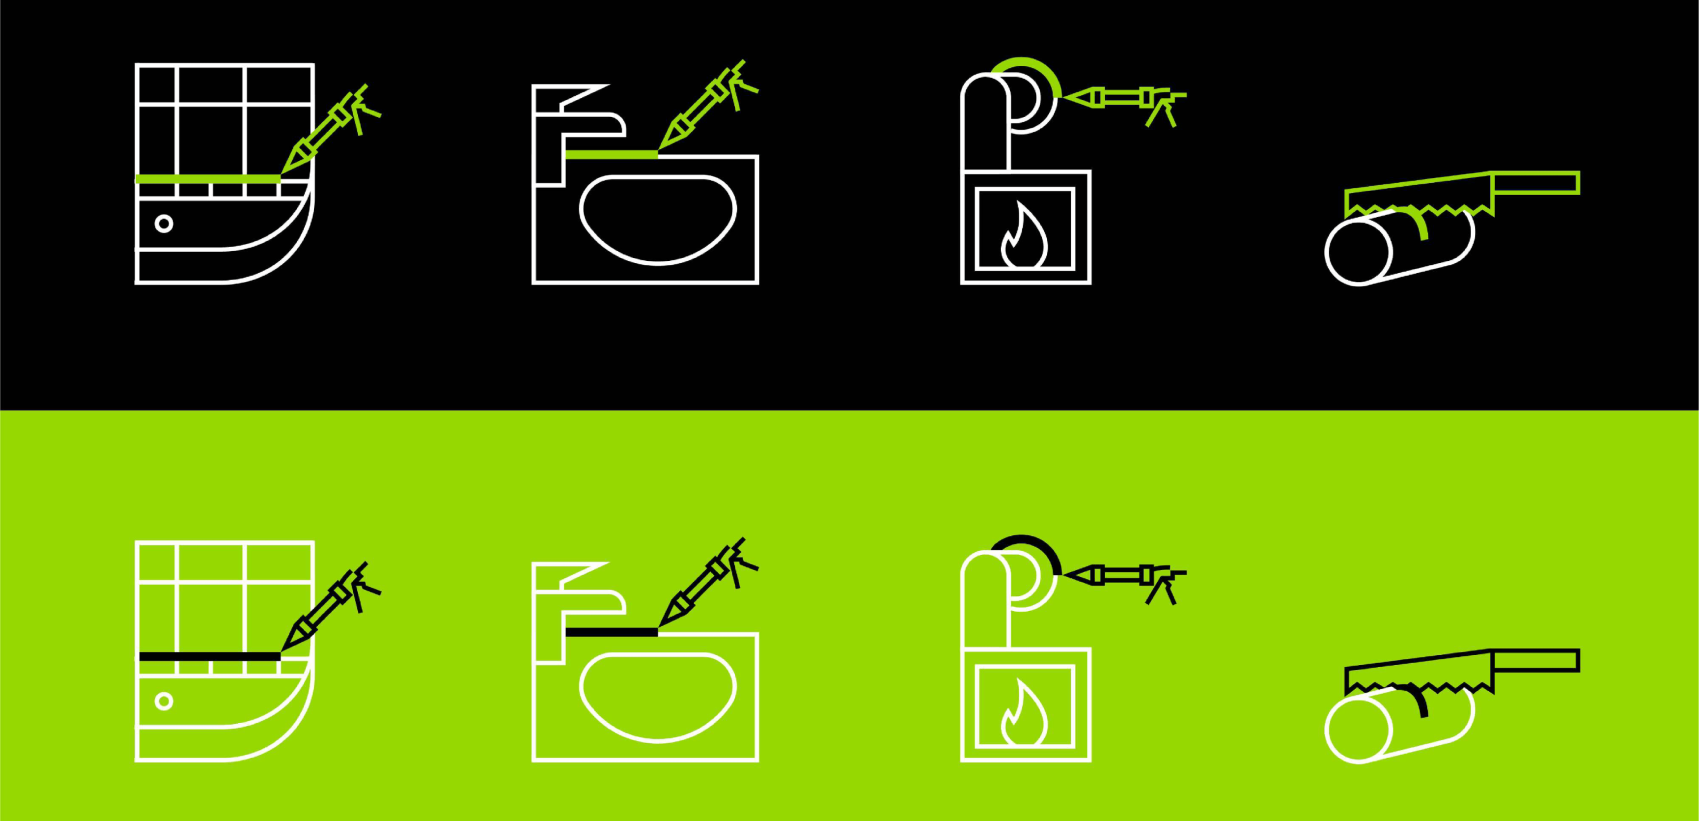 Icons in Stalco branding style